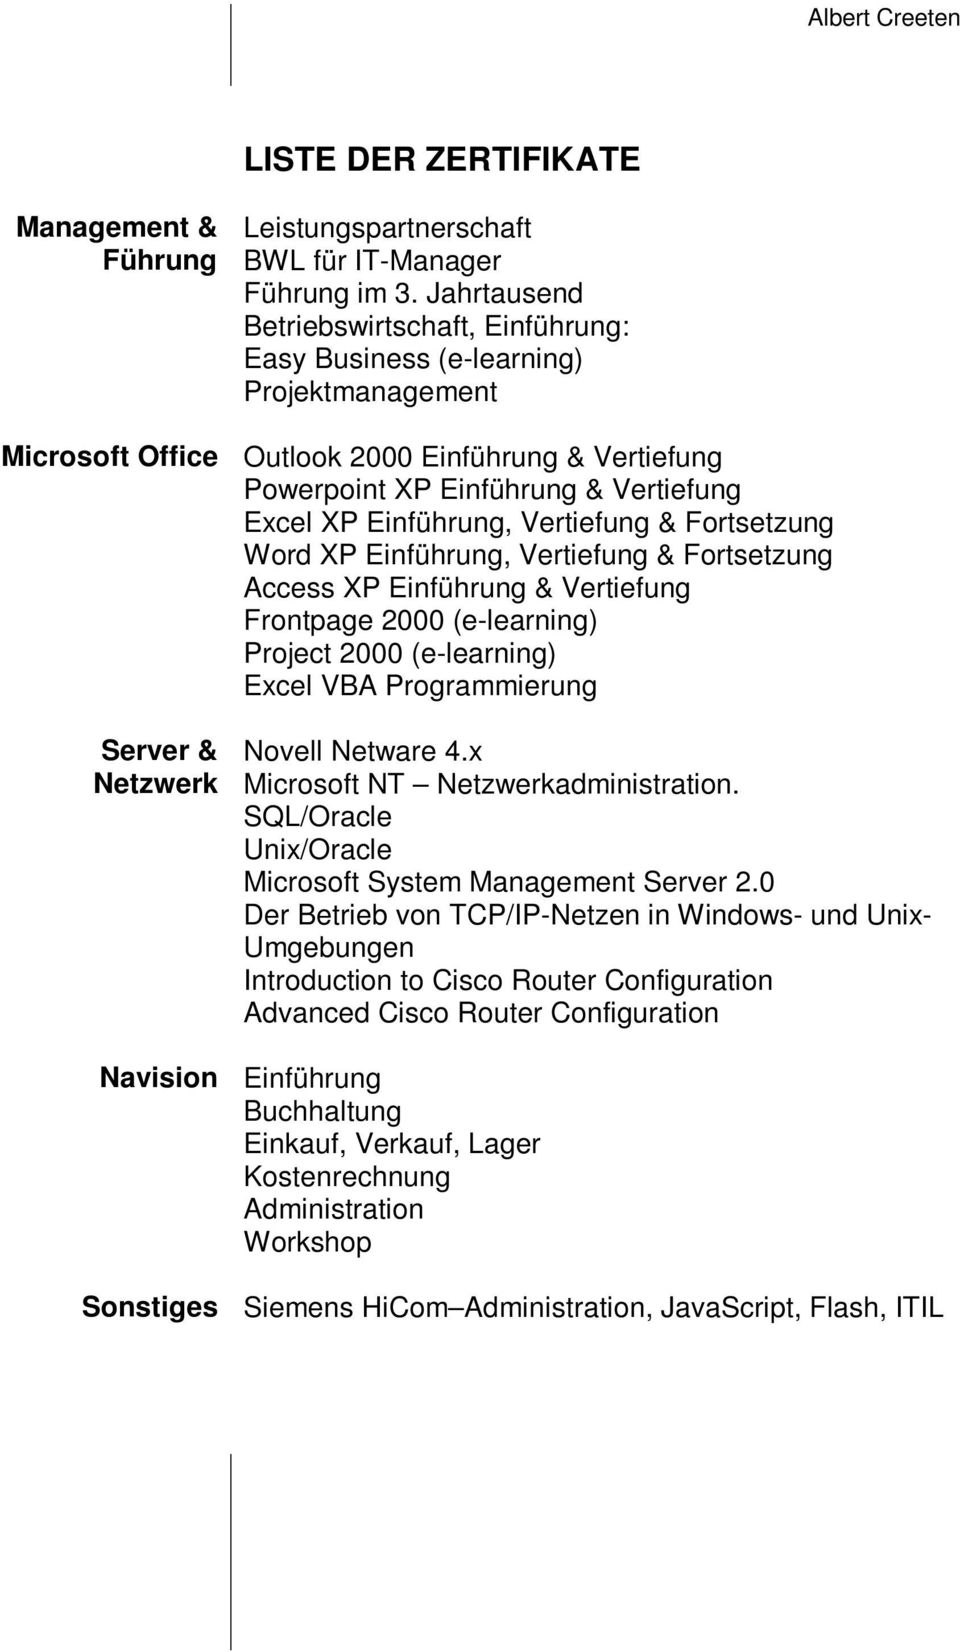 Einführung, Vertiefung & Fortsetzung Word XP Einführung, Vertiefung & Fortsetzung Access XP Einführung & Vertiefung Frontpage 2000 (e-learning) Project 2000 (e-learning) Excel VBA Programmierung